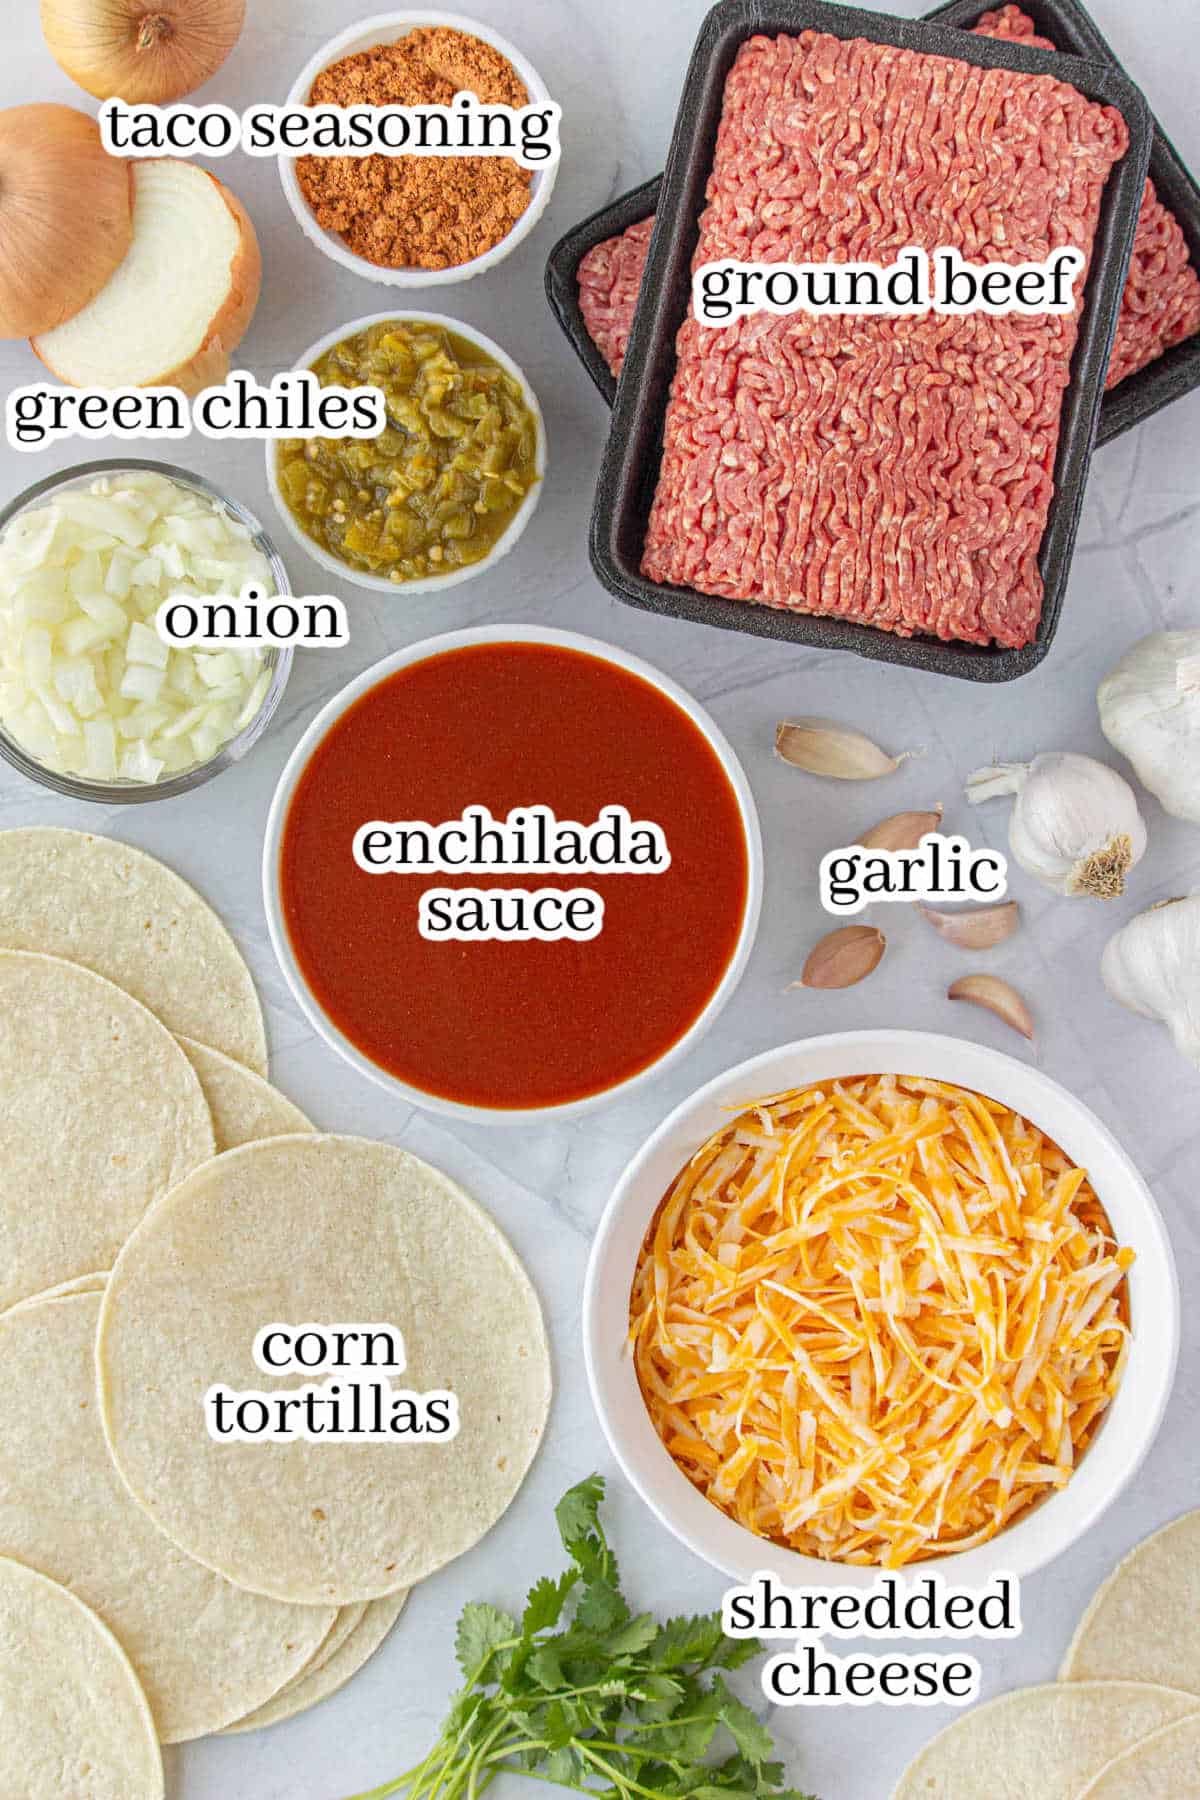 Ingredients needed to make the easy casserole recipe. With print overlay for clarification.